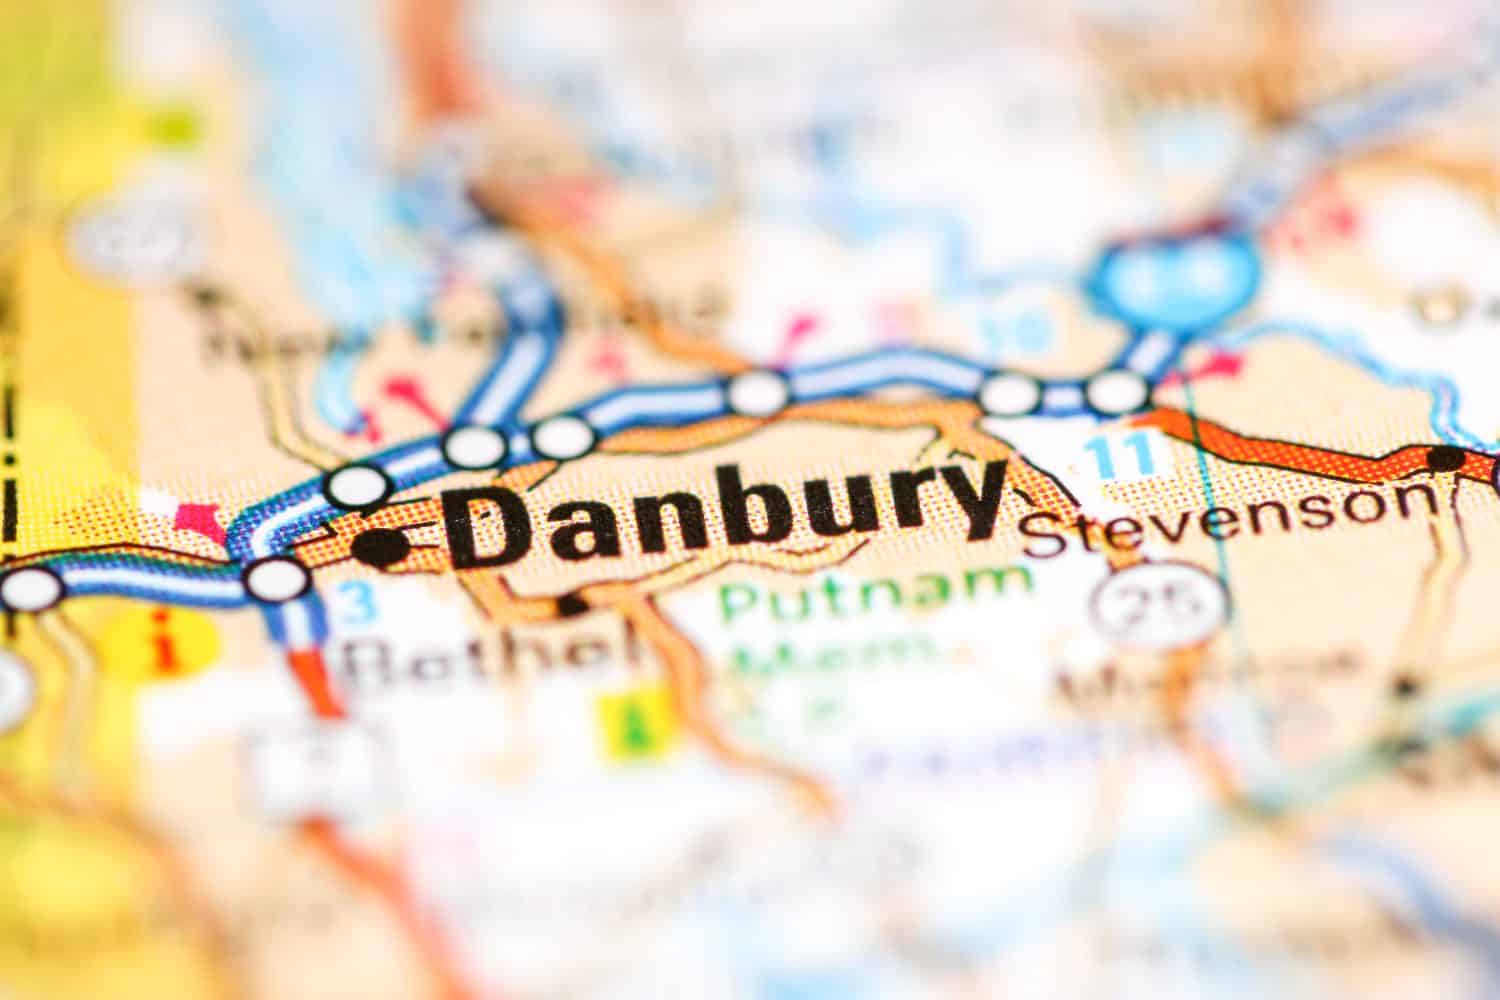 Danbury. Connecticut. USA on a geography map